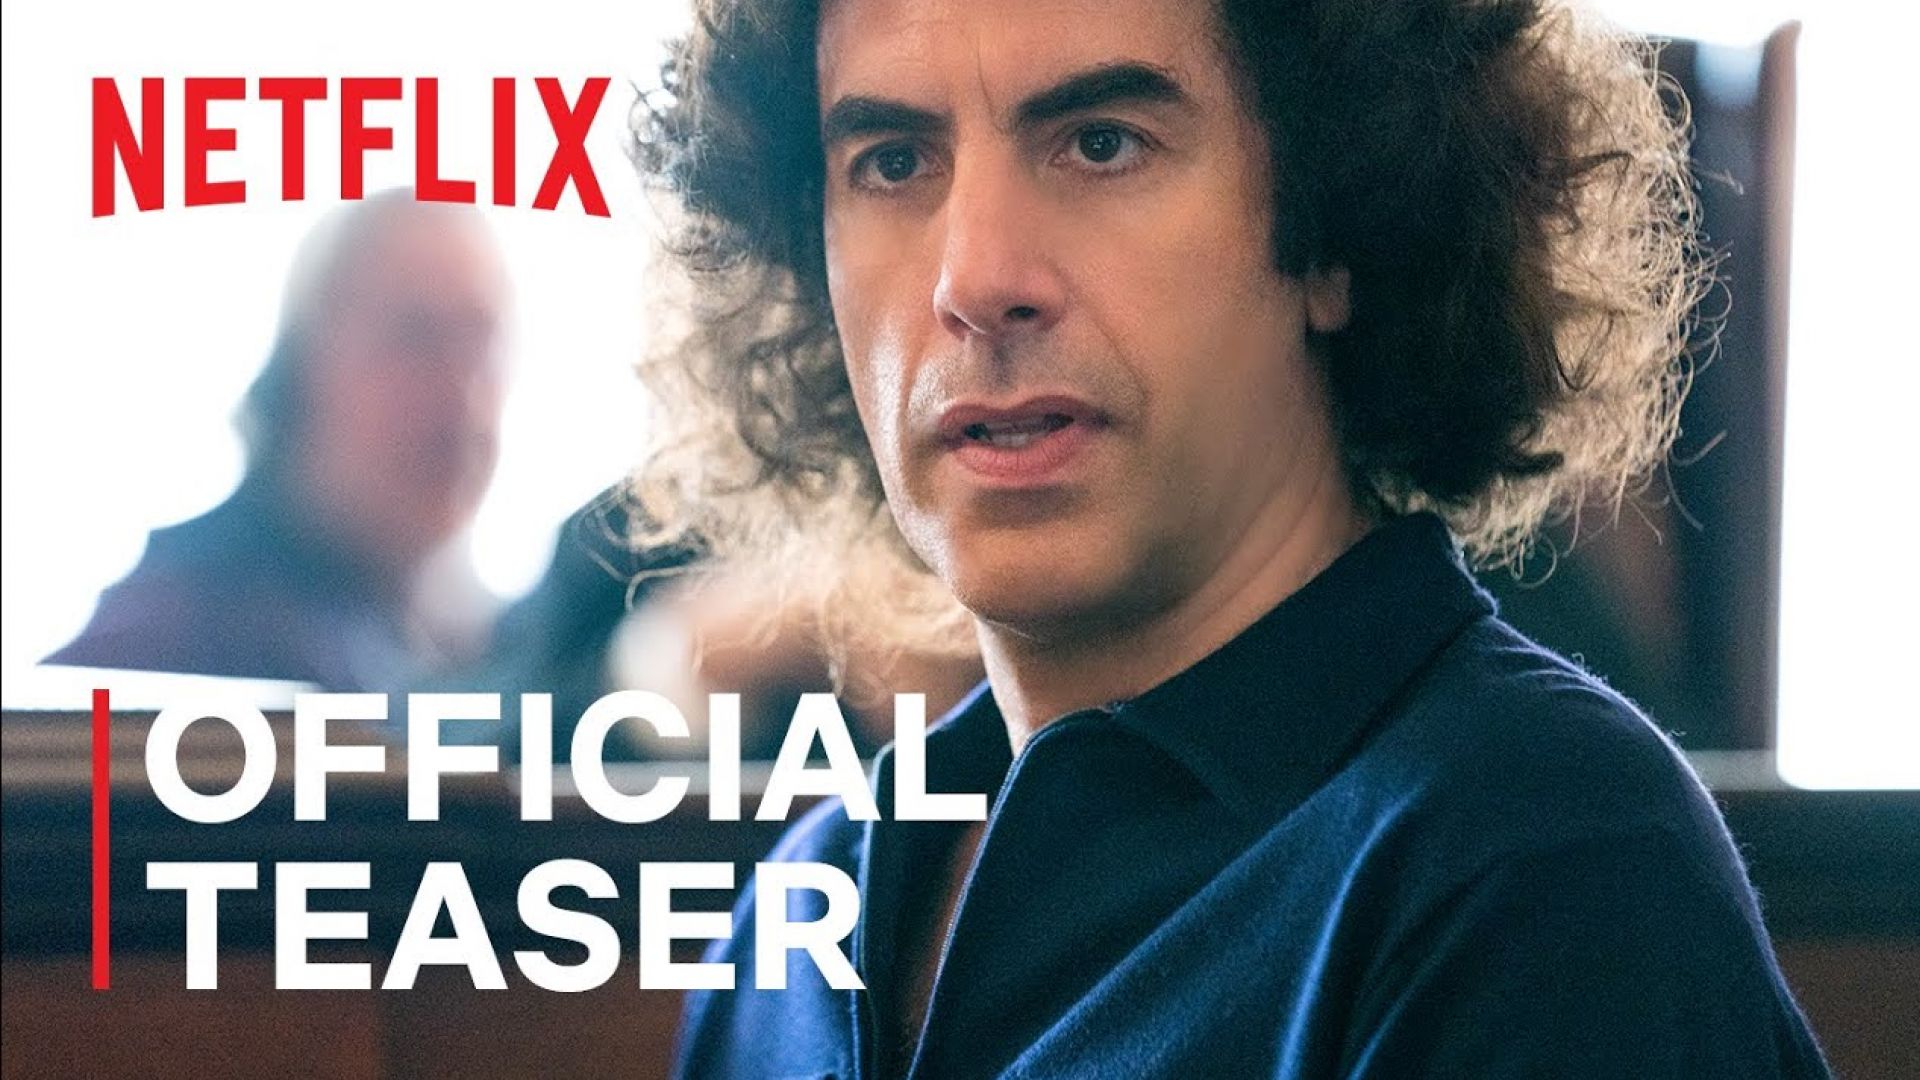 The Trial of the Chicago 7 Trailer ⎮ Streaming on Netflix 